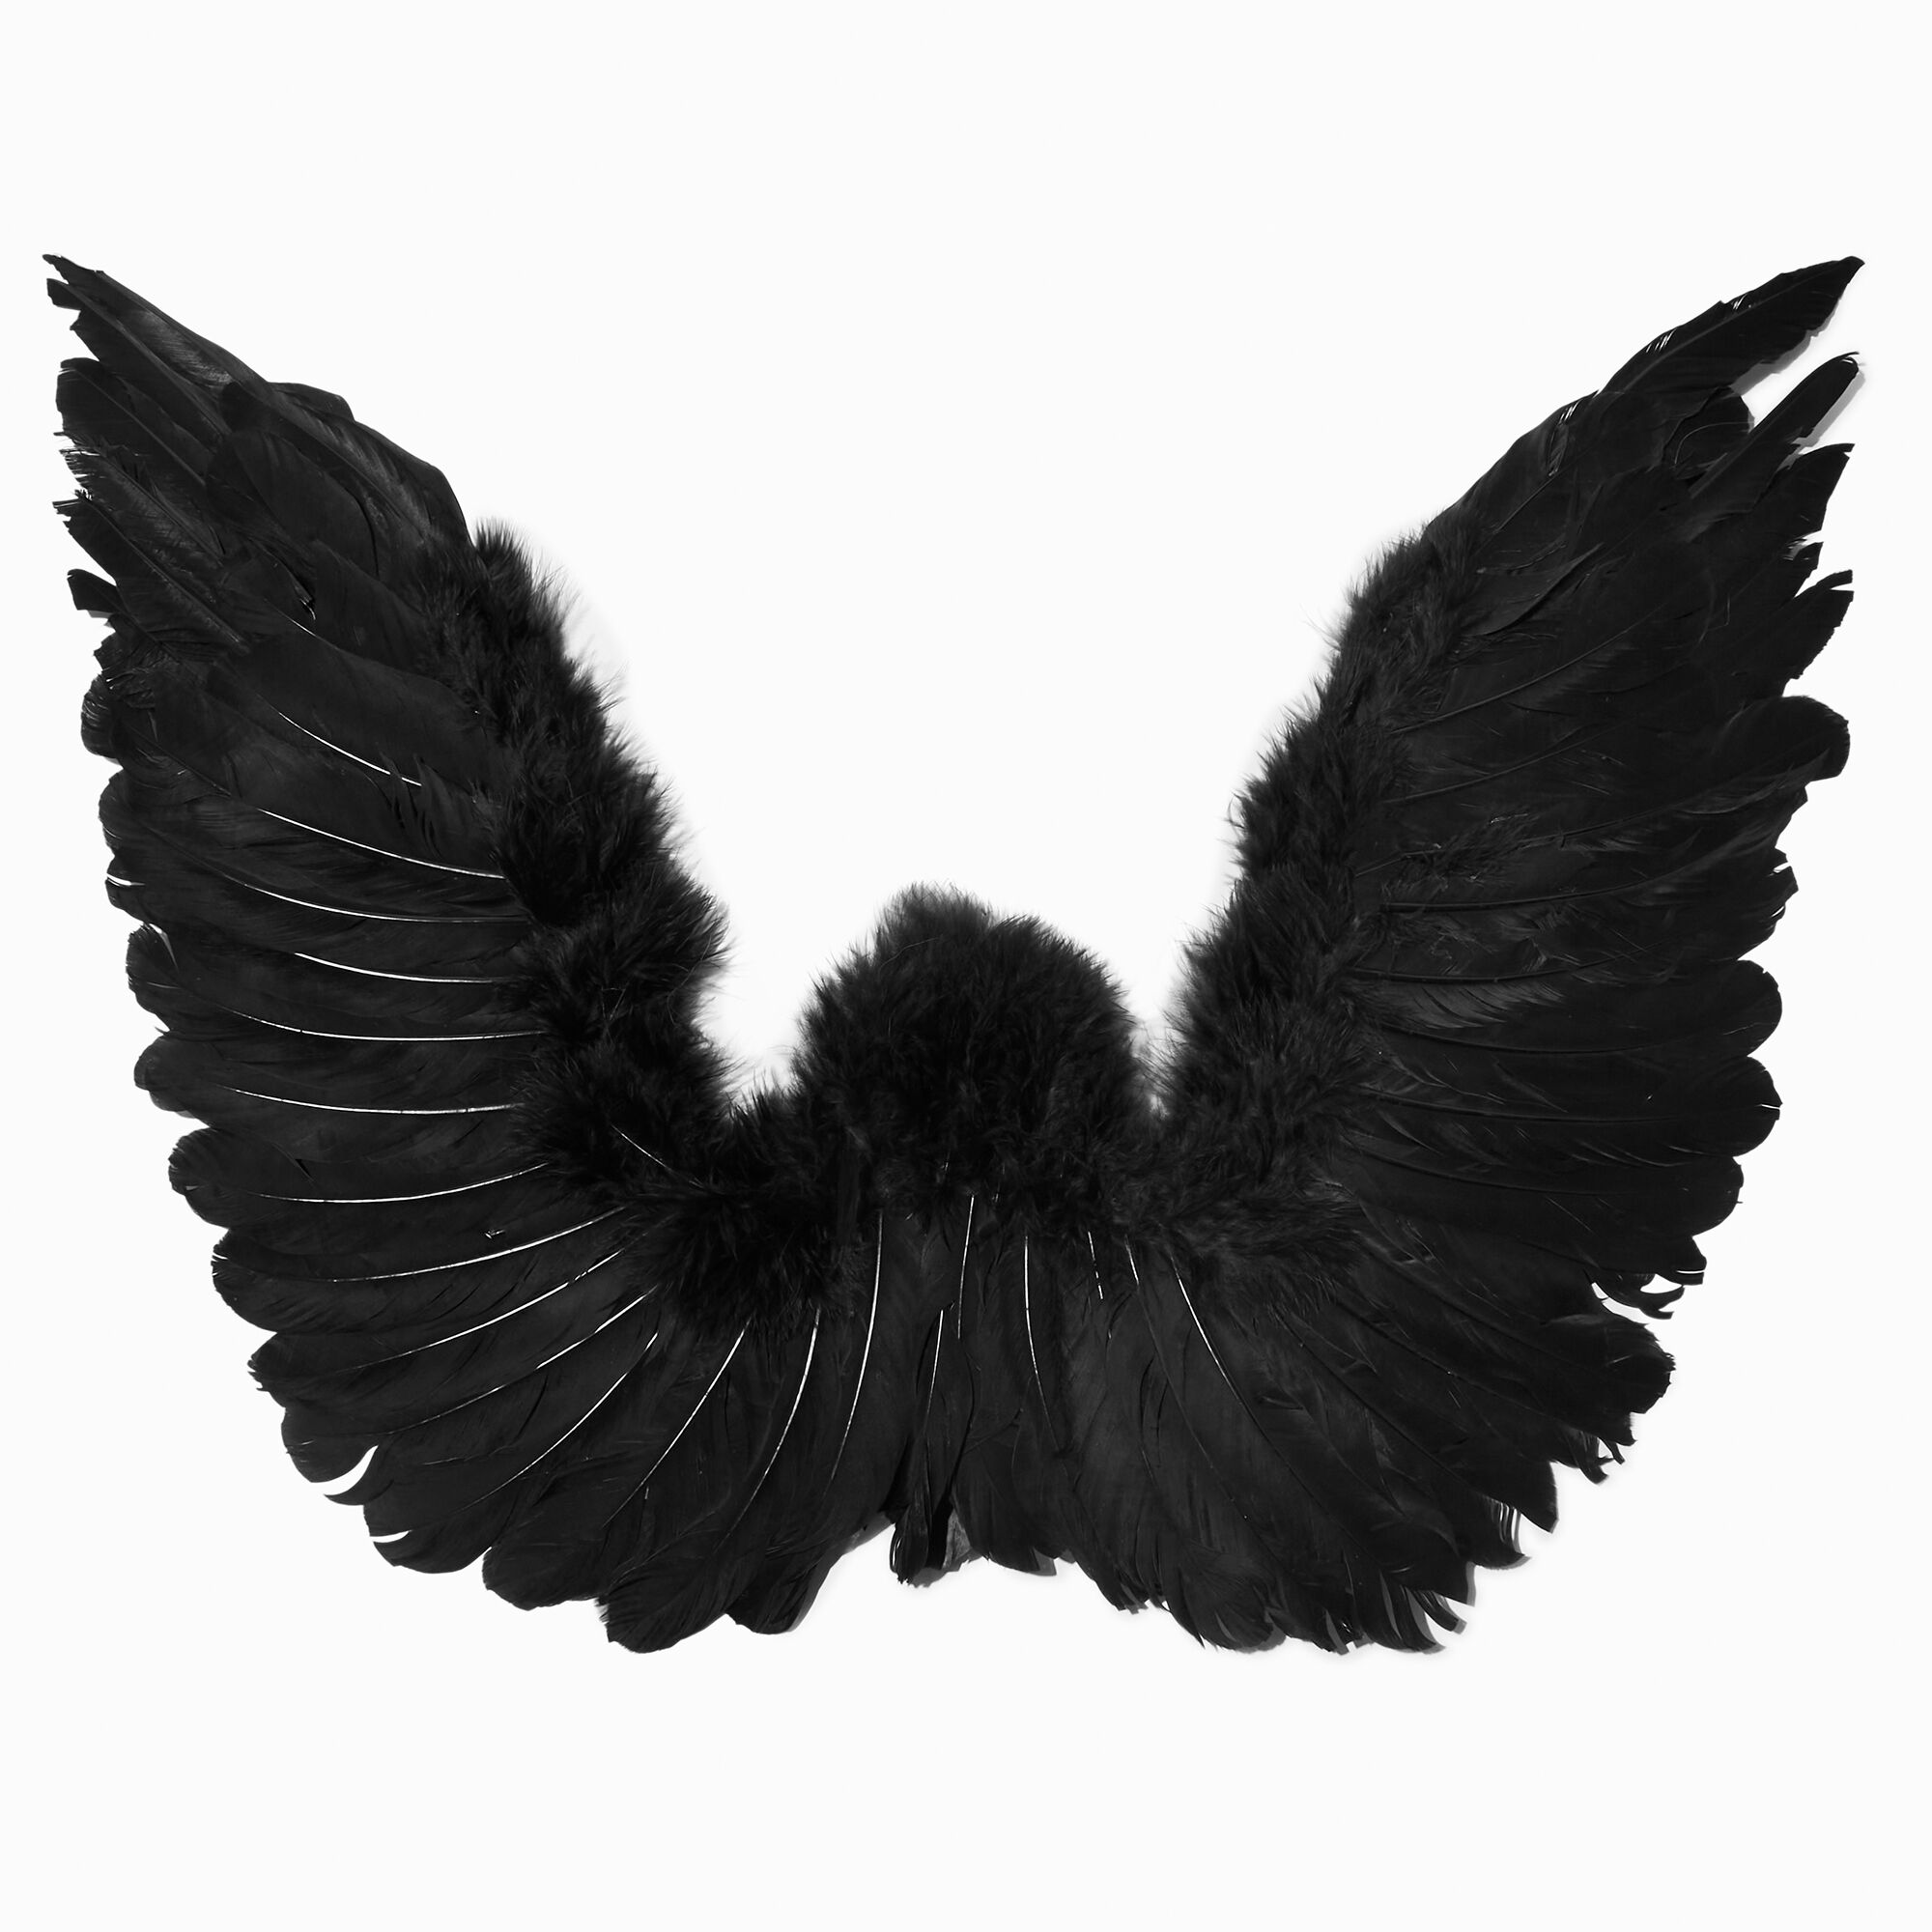 View Claires Feathery Angel Wings Black information